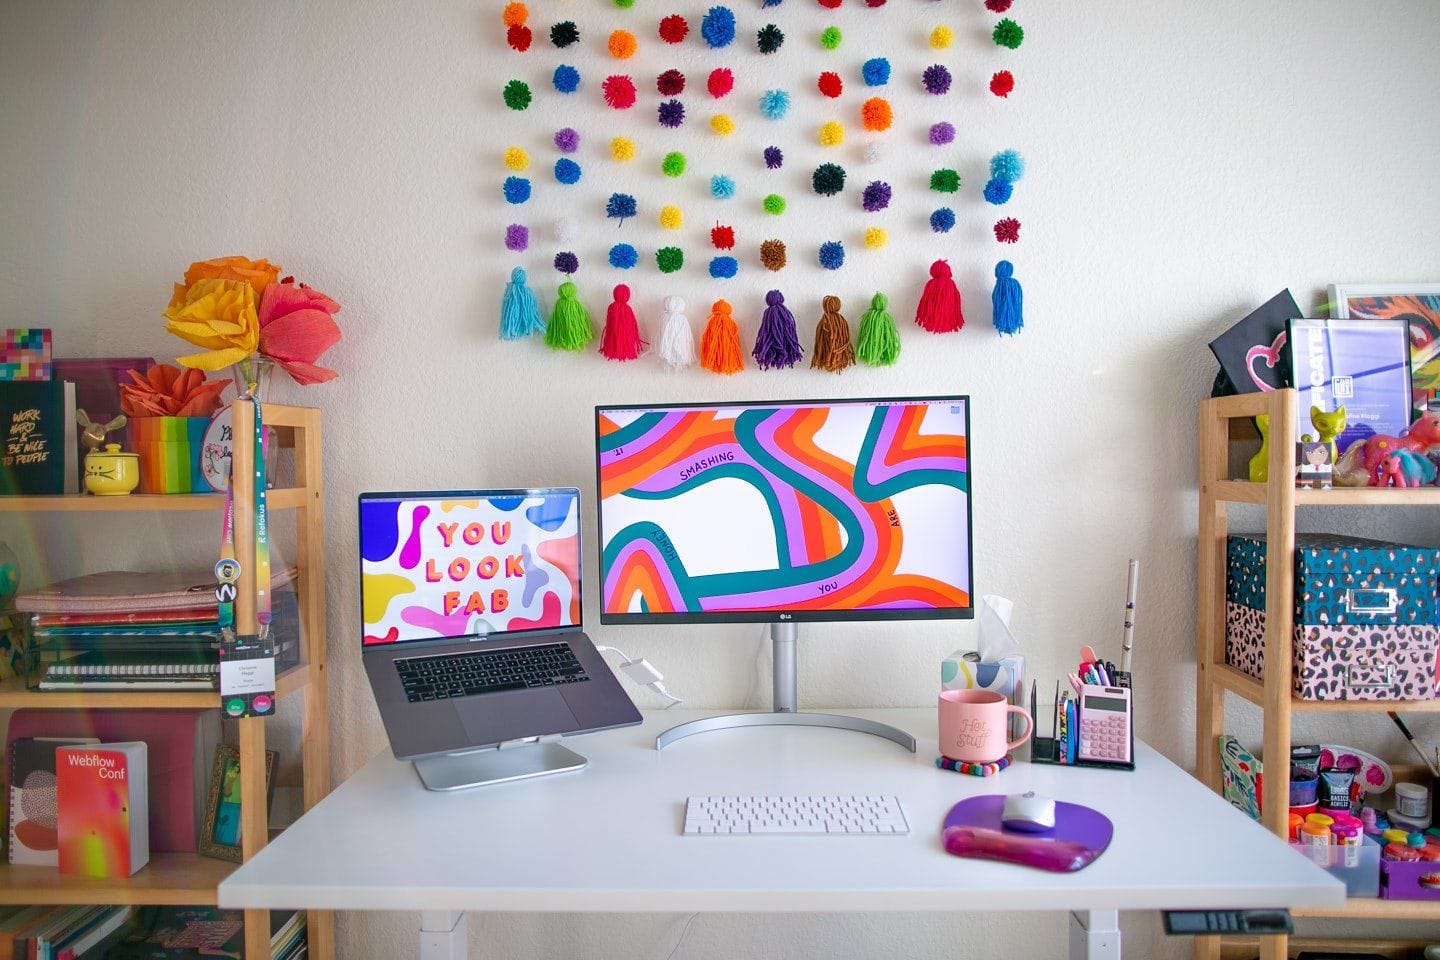 A colourful desk setup with a laptop, monitor, keyboard, mouse, and various decorative items, including paper flowers, a rainbow tassel wall hanging, and shelves filled with books and office supplies